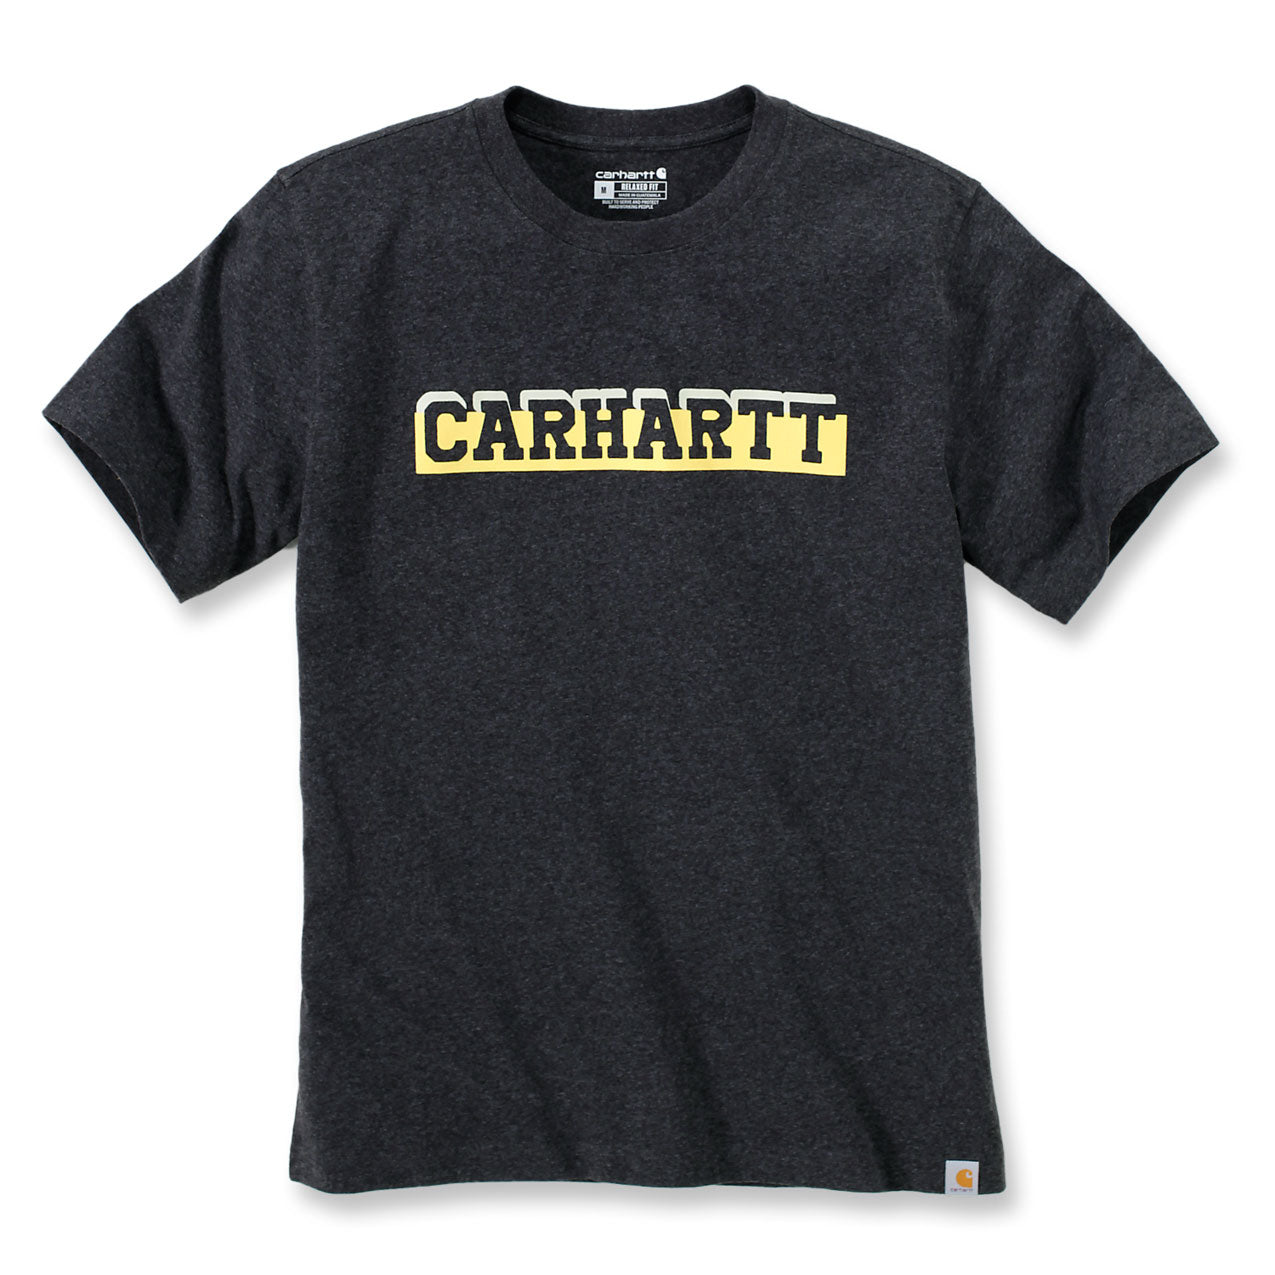 SS LOGO GRAPHIC T-SHIRT Carbon Heather